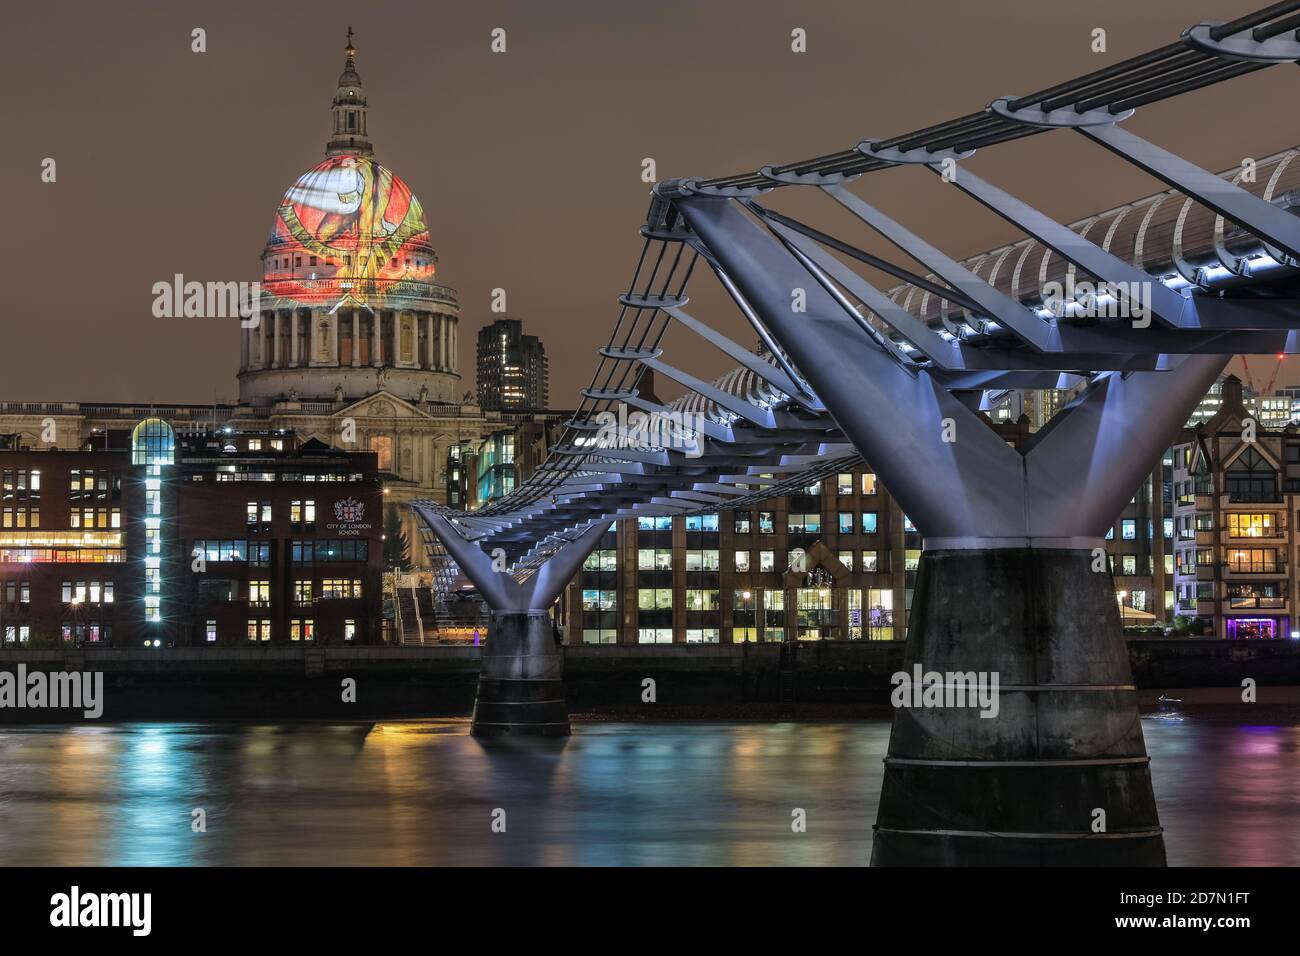 The dome of St Paul's Cathedral with Millennium Bridge, from across the River Thames, with projection of William Blake’s ‘Ancient of Days’, London, UK Stock Photo